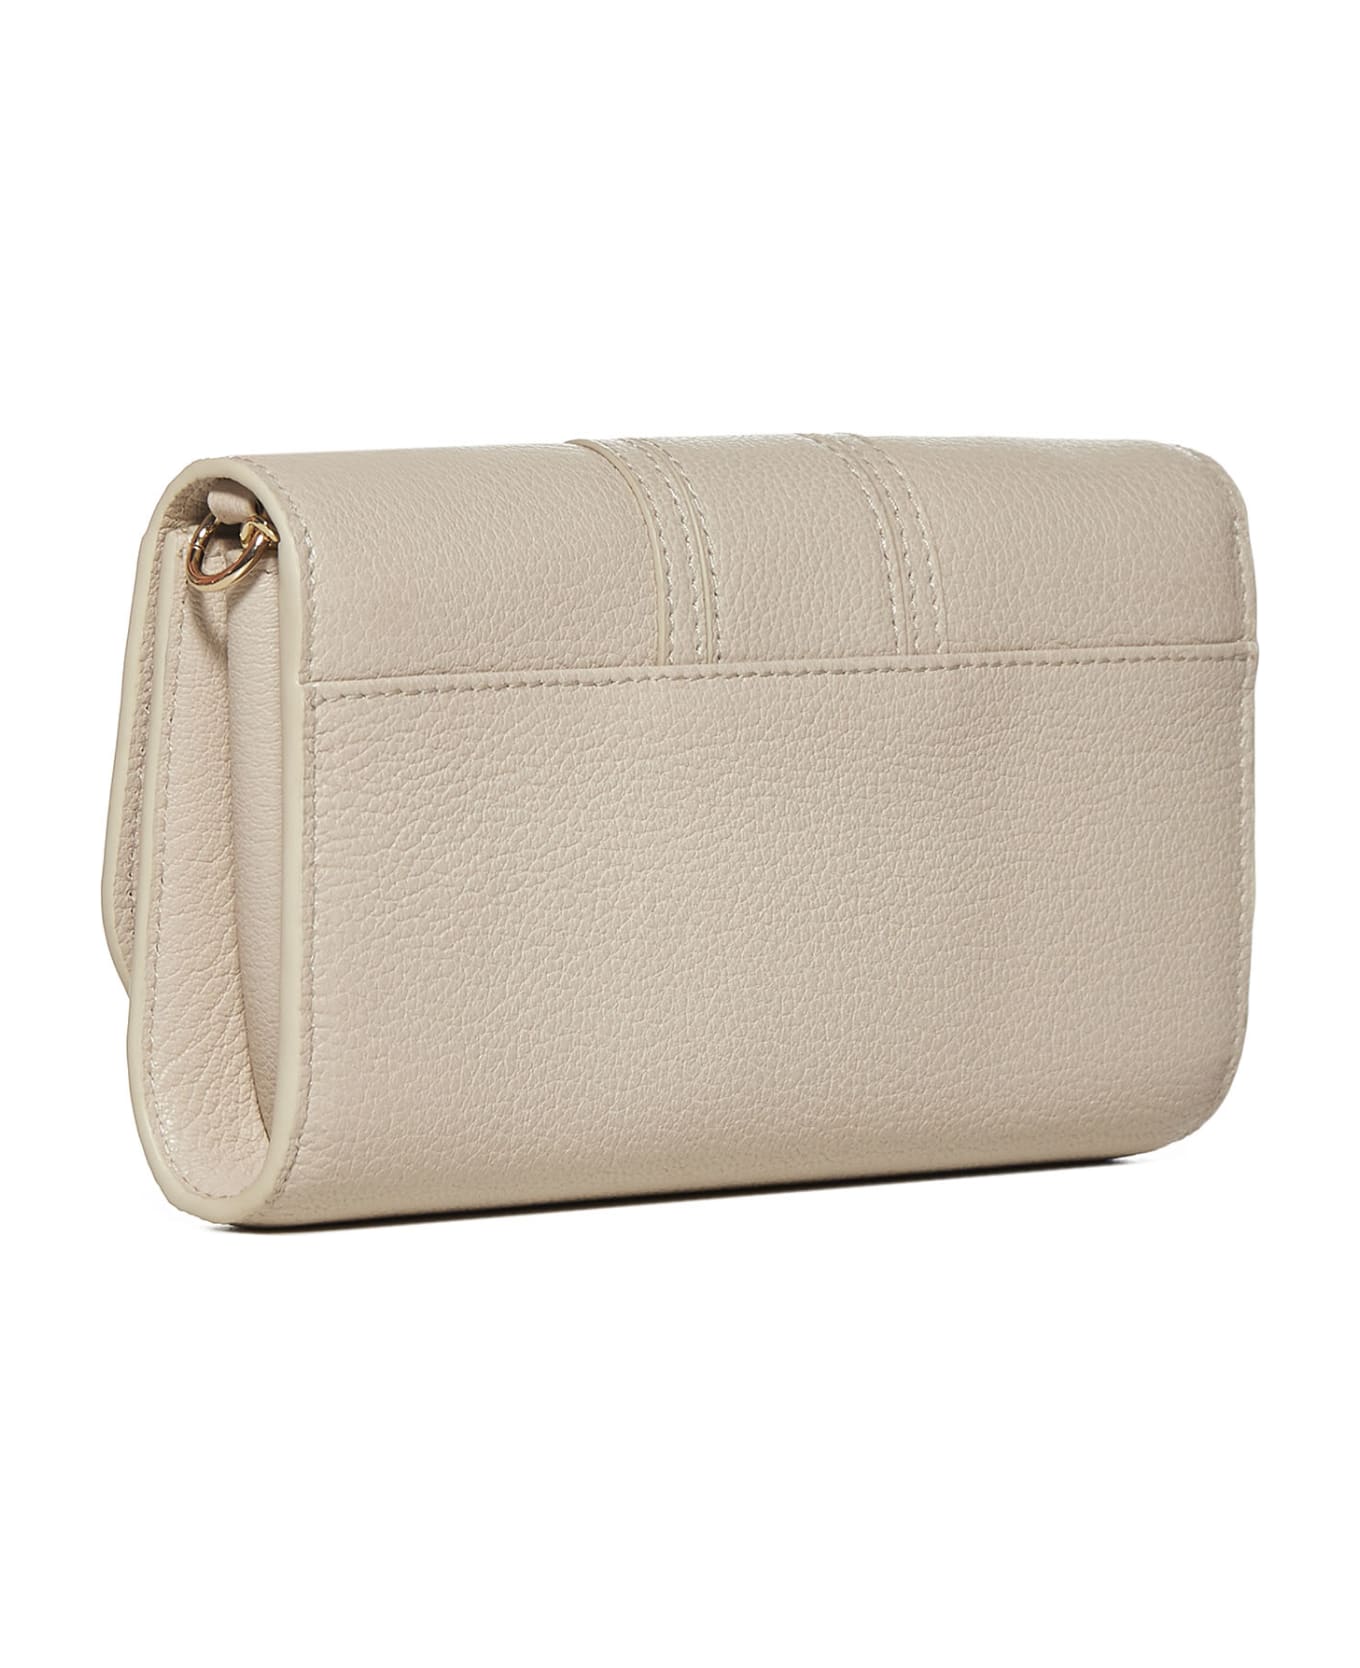 See by Chloé Shoulder Bag - Cement beige ショルダーバッグ